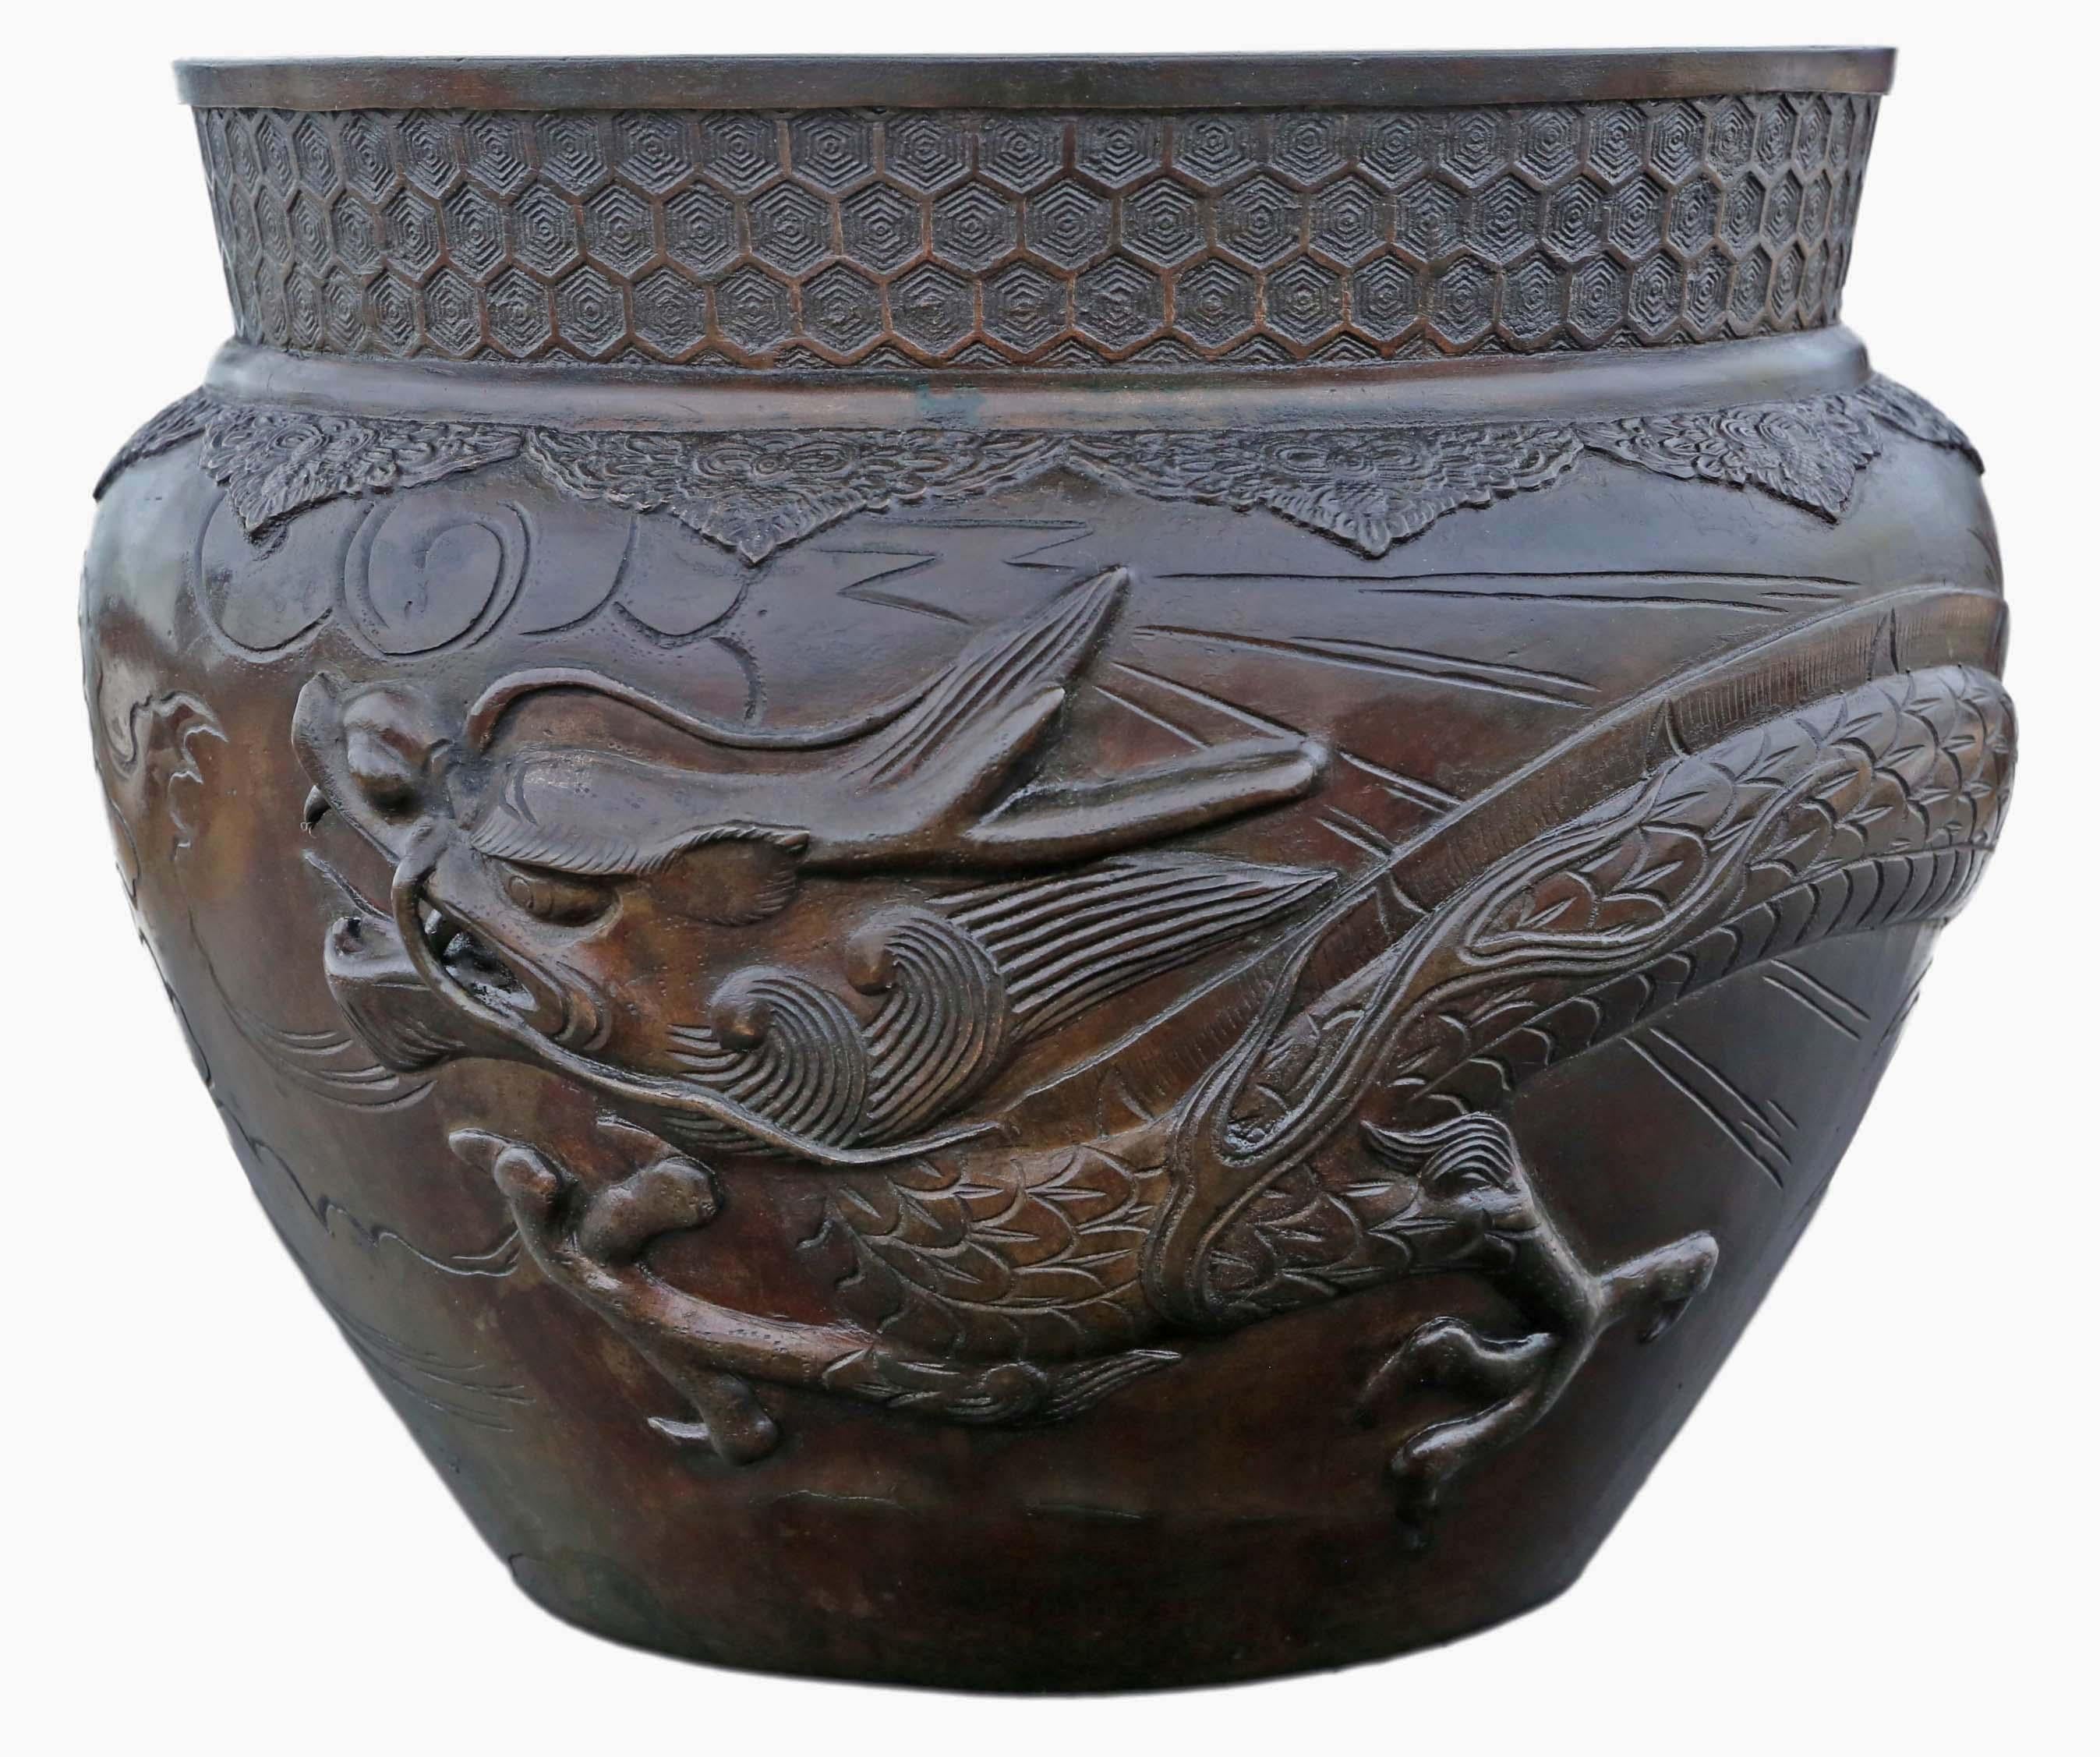 Antique fine quality large Oriental Japanese bronze Jardinière planter bowl censor Meiji Period, 19th Century with dragon relief decoration. Artist piece

Would look amazing in the right location and make a fabulous centre piece. Rare large size